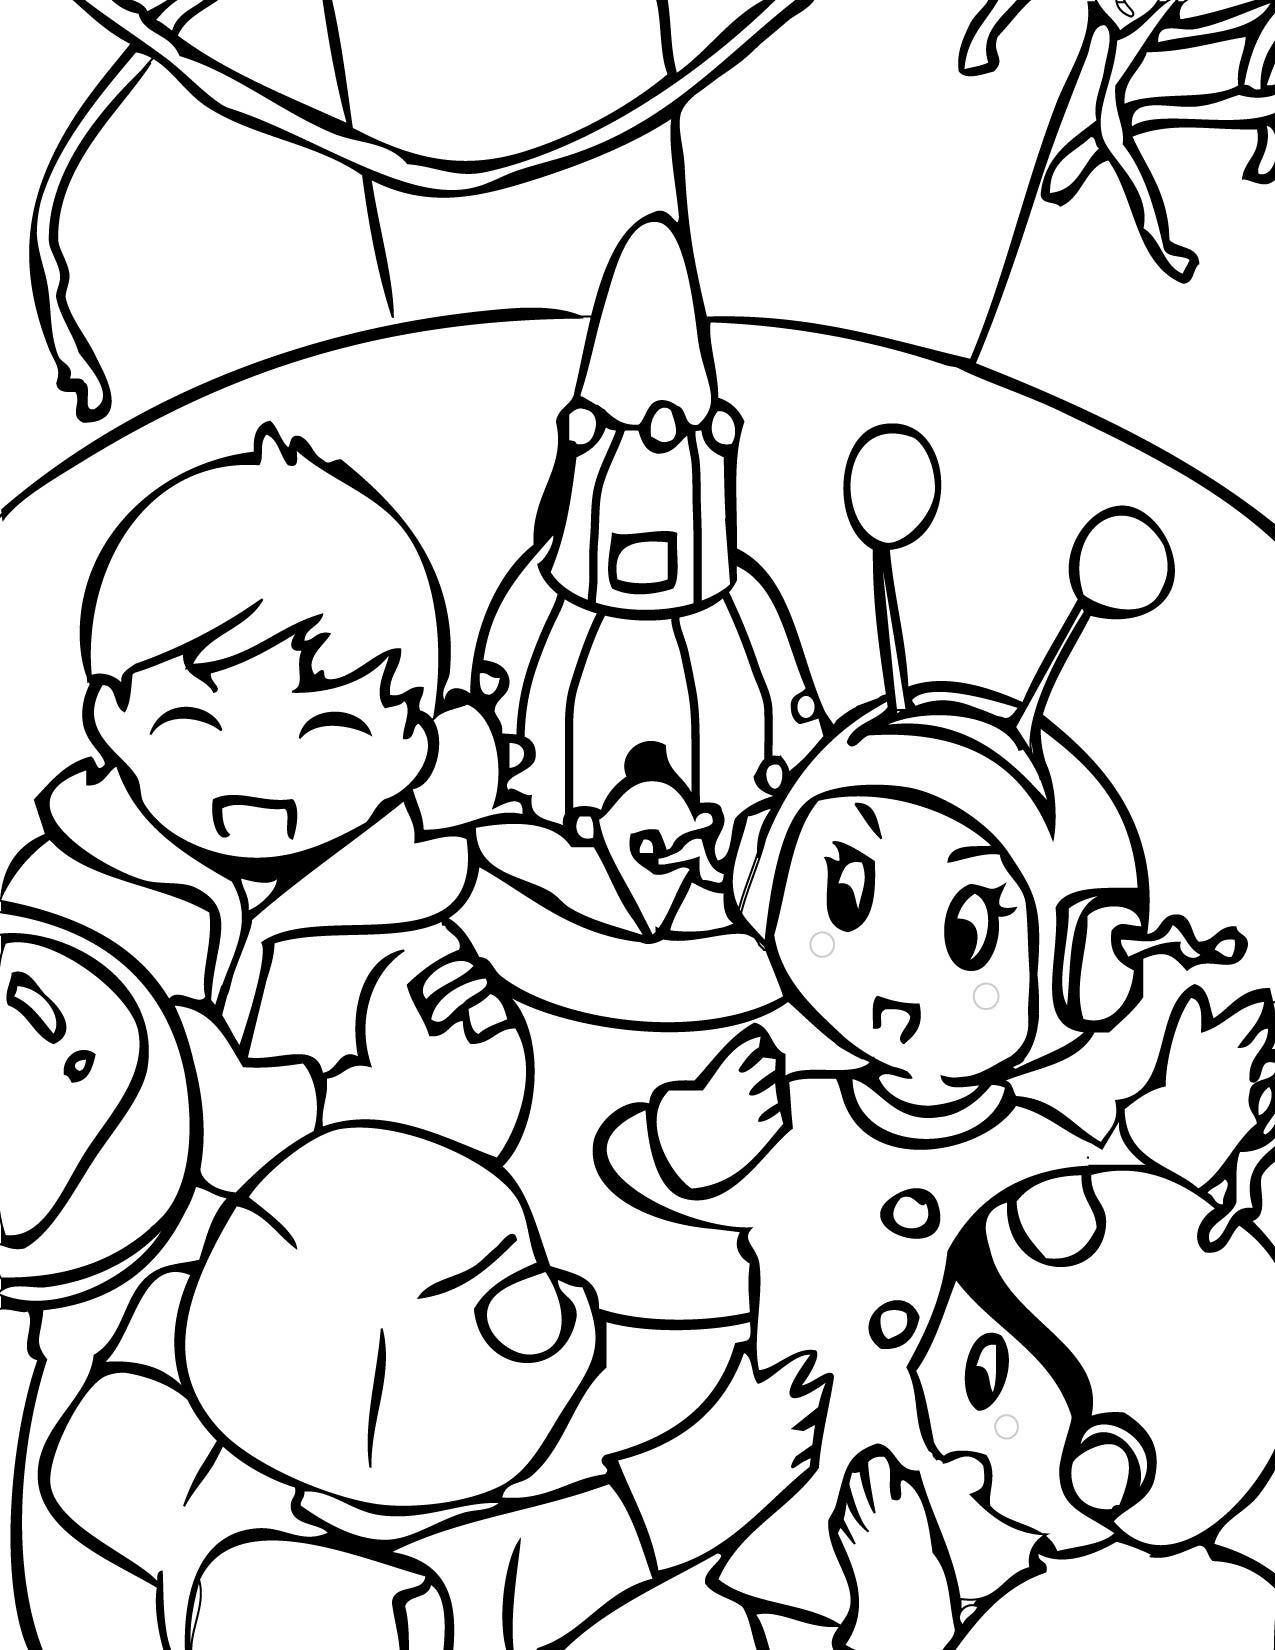 Alien In Spaceship Alien Coloring Page Coloring Page Space ...